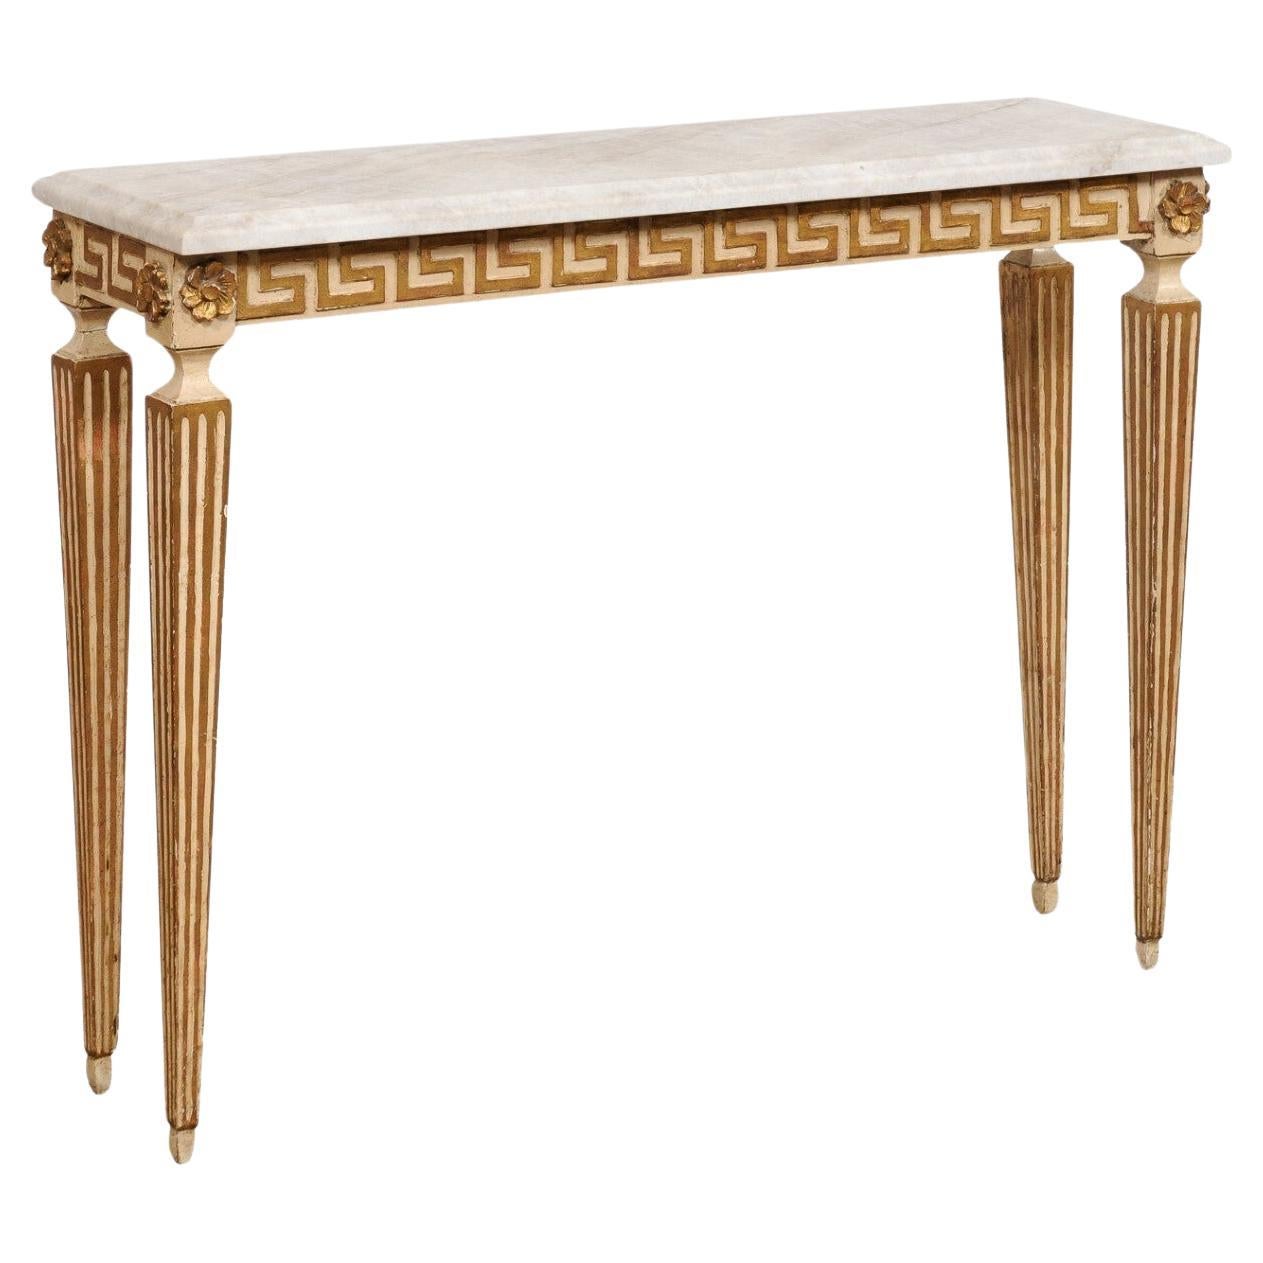 Italian Quartzite Top Console Table w/Greek Key & Fluted Carved Motif